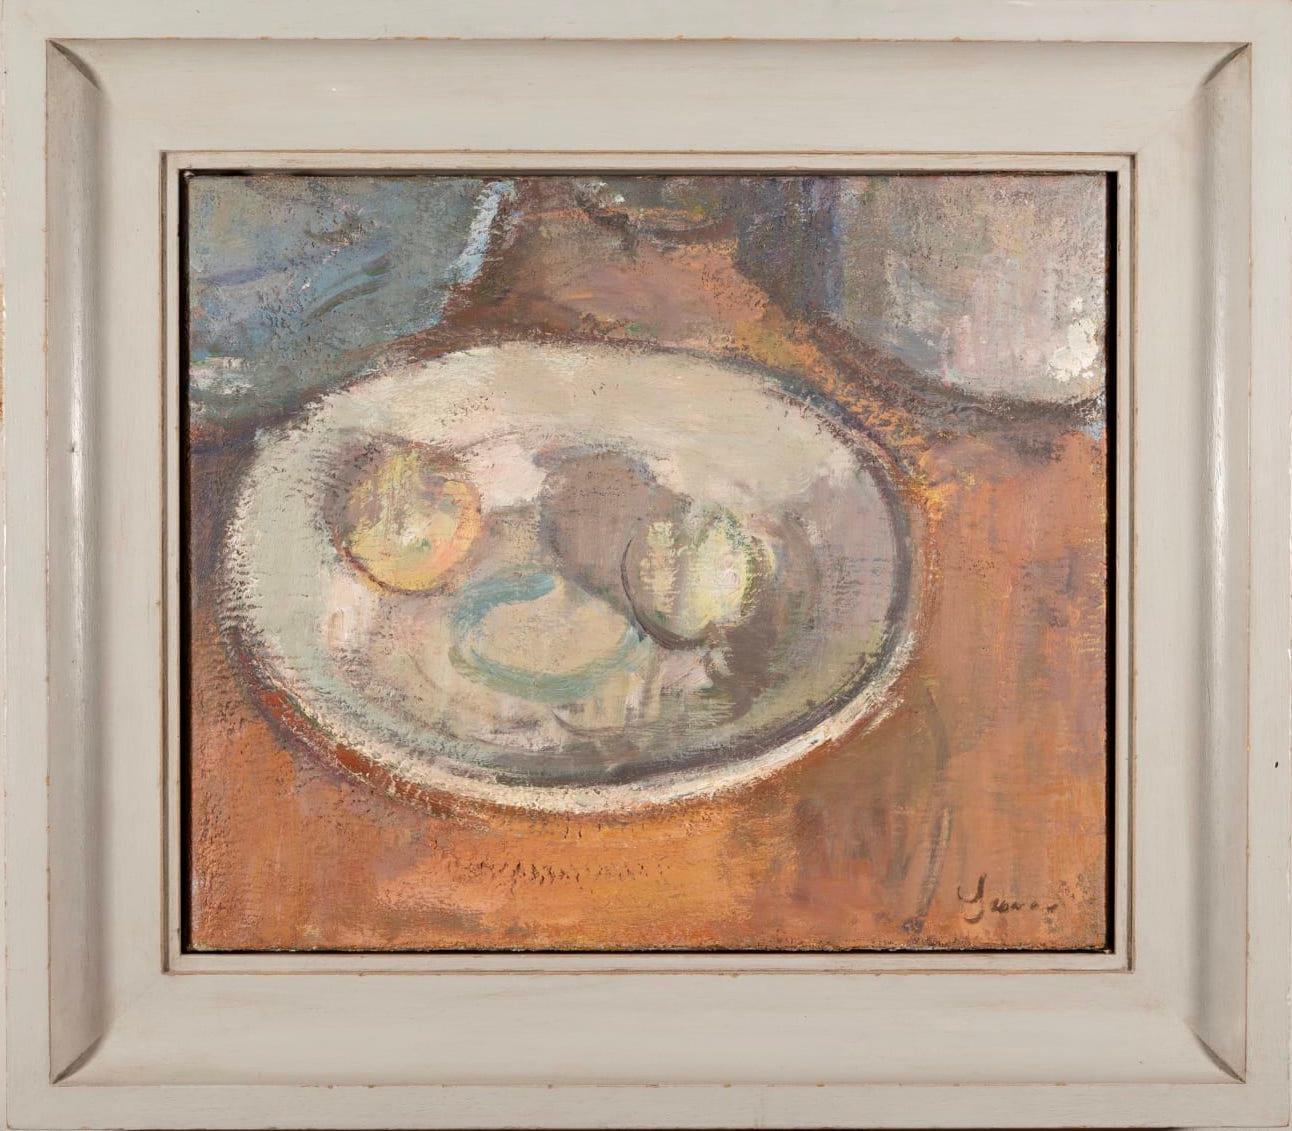 Two Apples in a Bowl II, Oil on Canvas, 2014 - Painting by Martin Yeoman